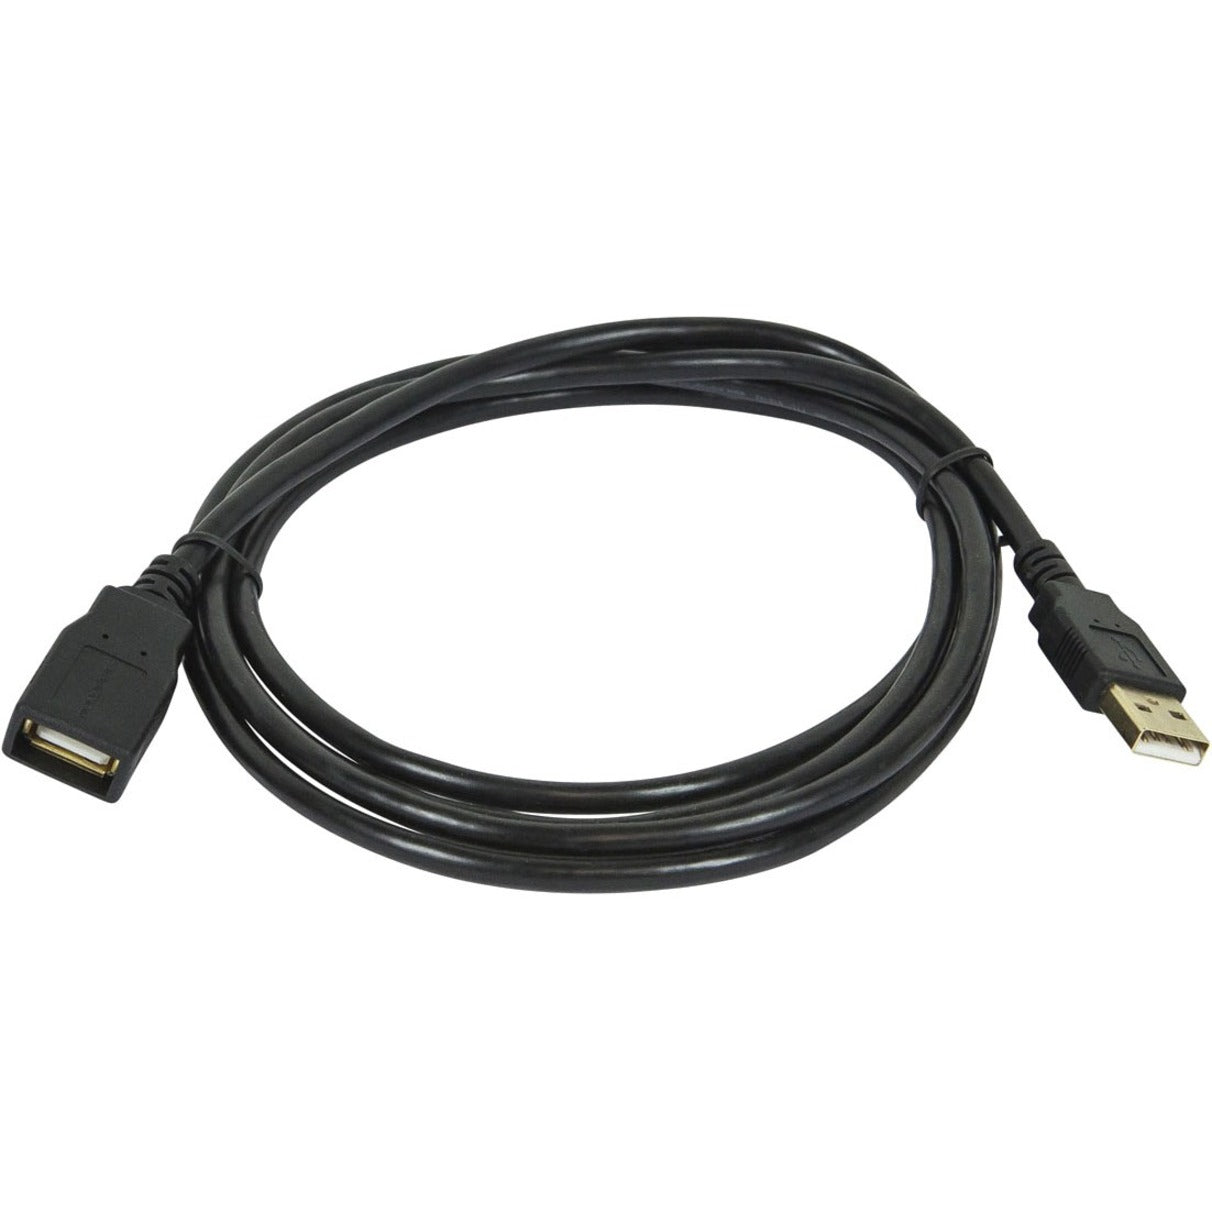 Monoprice 5433 6ft USB 2.0 A Male to A Female Extension Cable Corrosion-Free Gold Plated